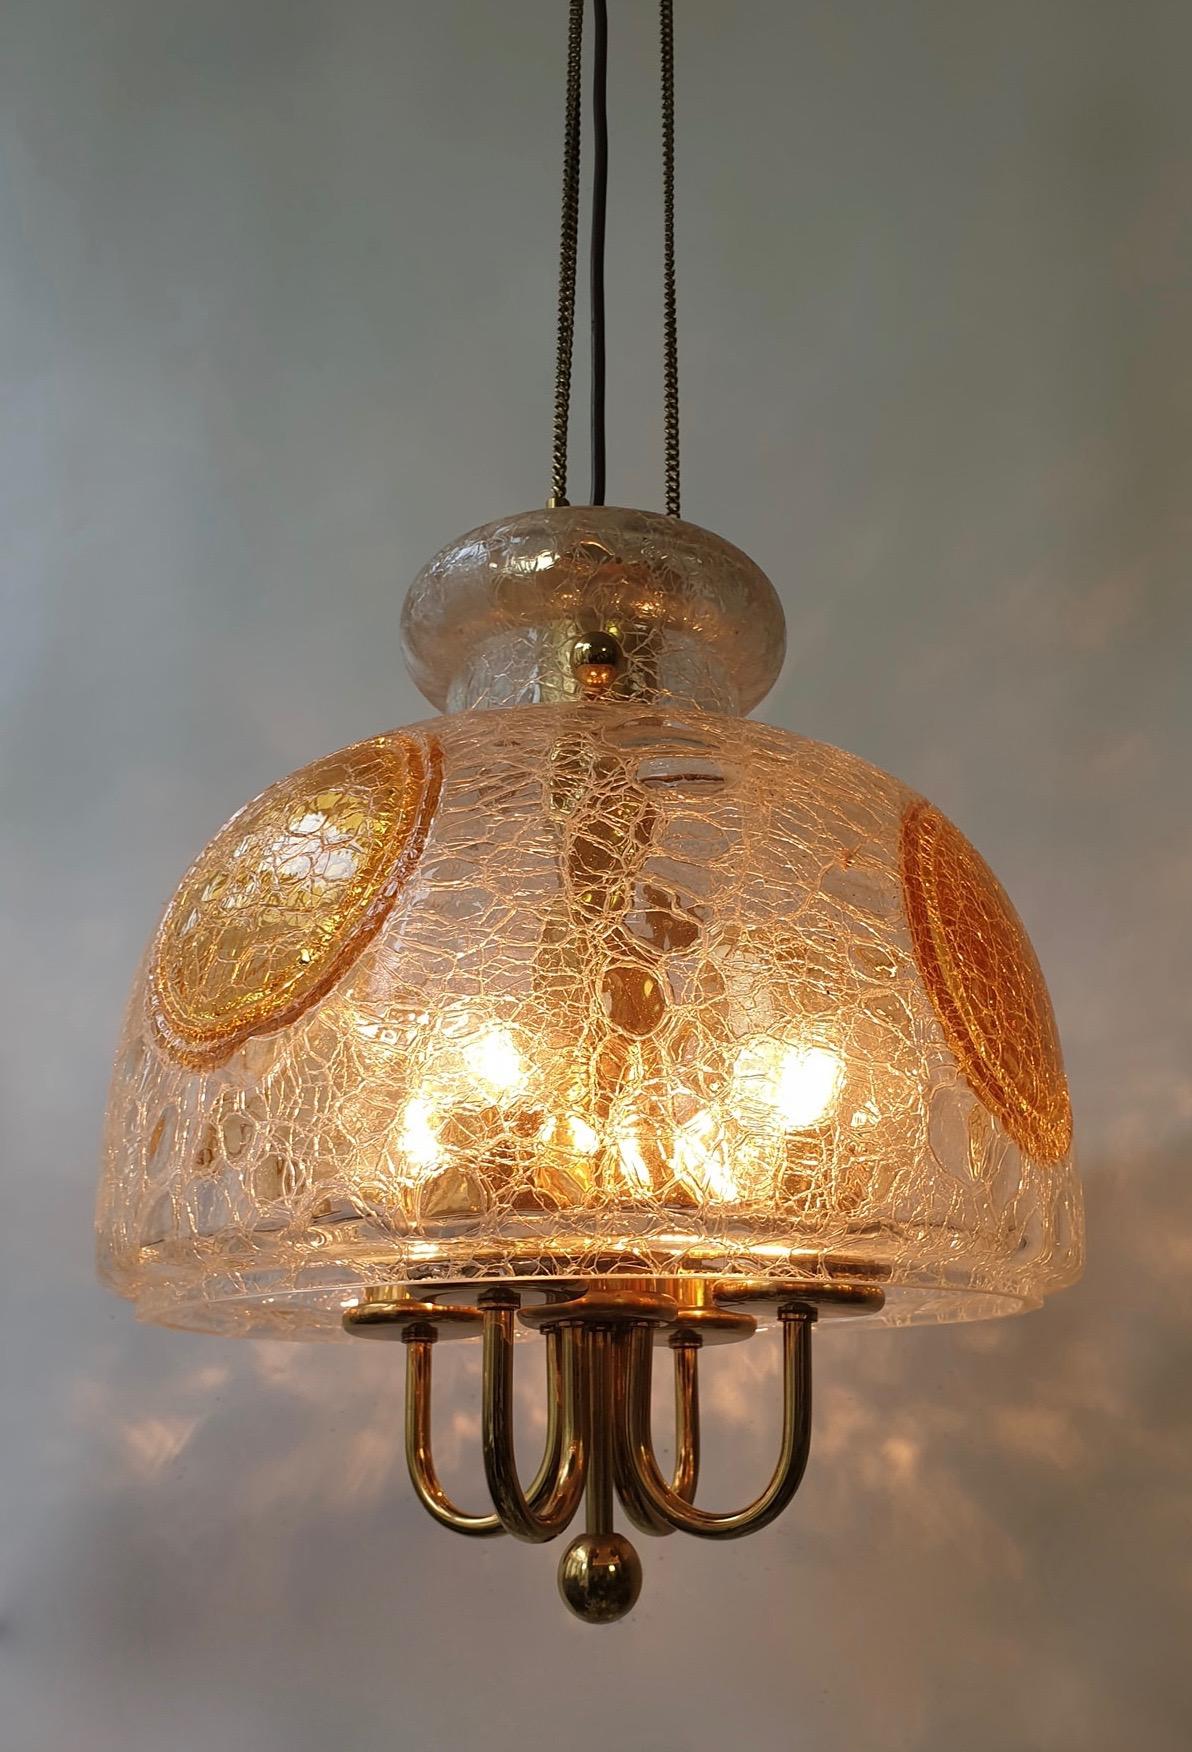 Murano glass and brass pendant light.
Diameter 34 cm.
Height fixture 40 cm.
Total height included with the chain 120 cm.
Four E27 bulbs.